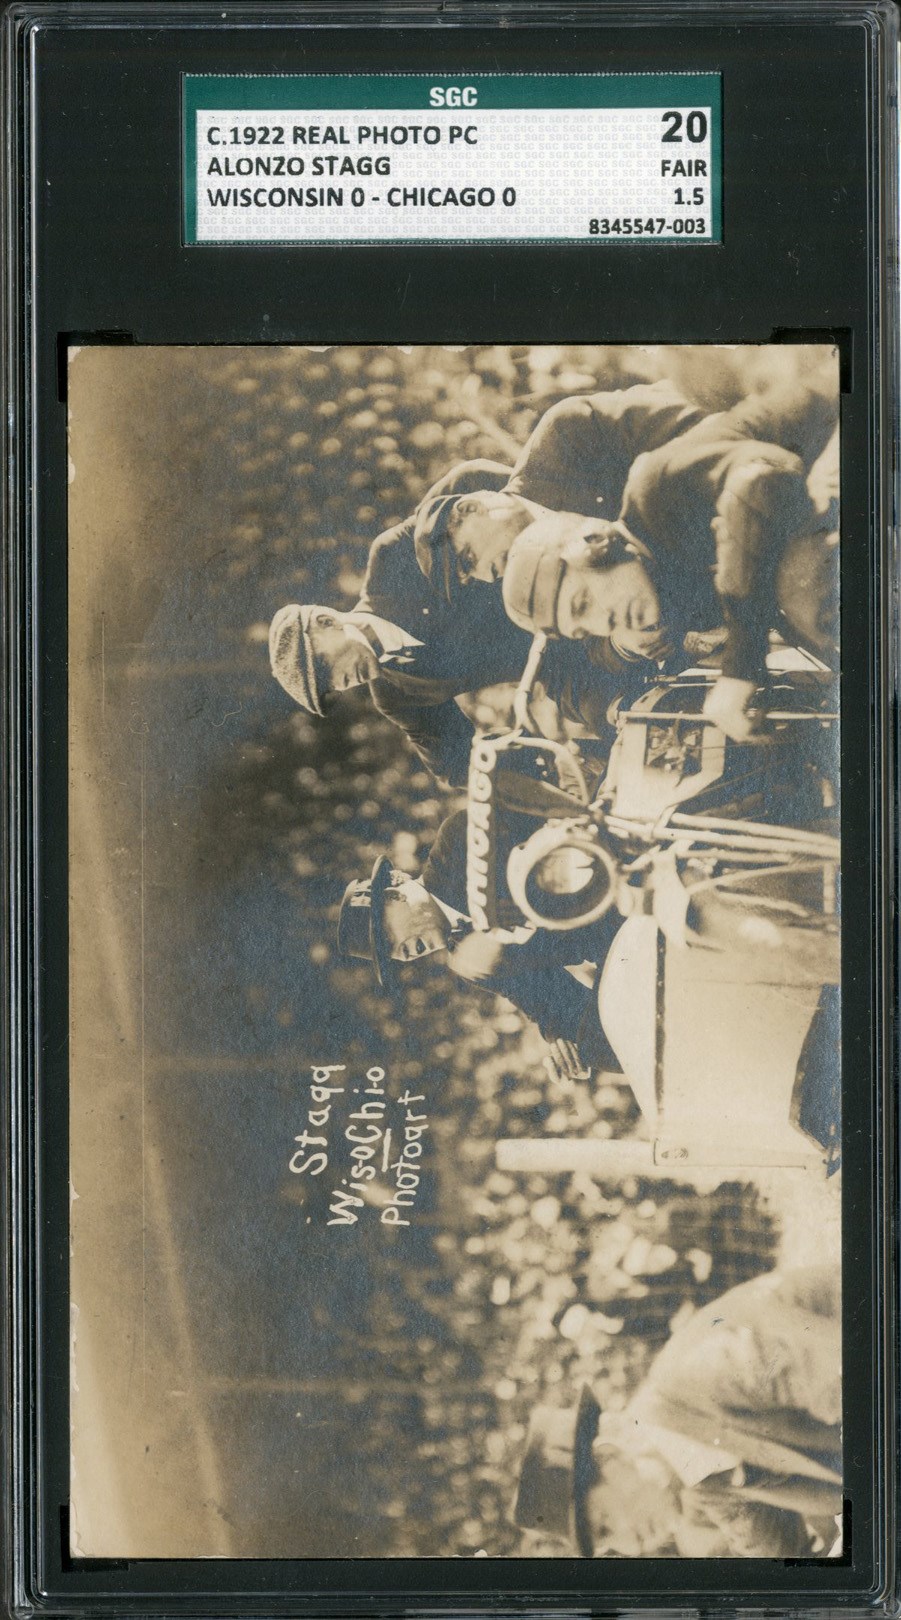 1922 Amos Alonzo Staggs "Coaching By Motorcycle" Real Photo Postcard (SGC)